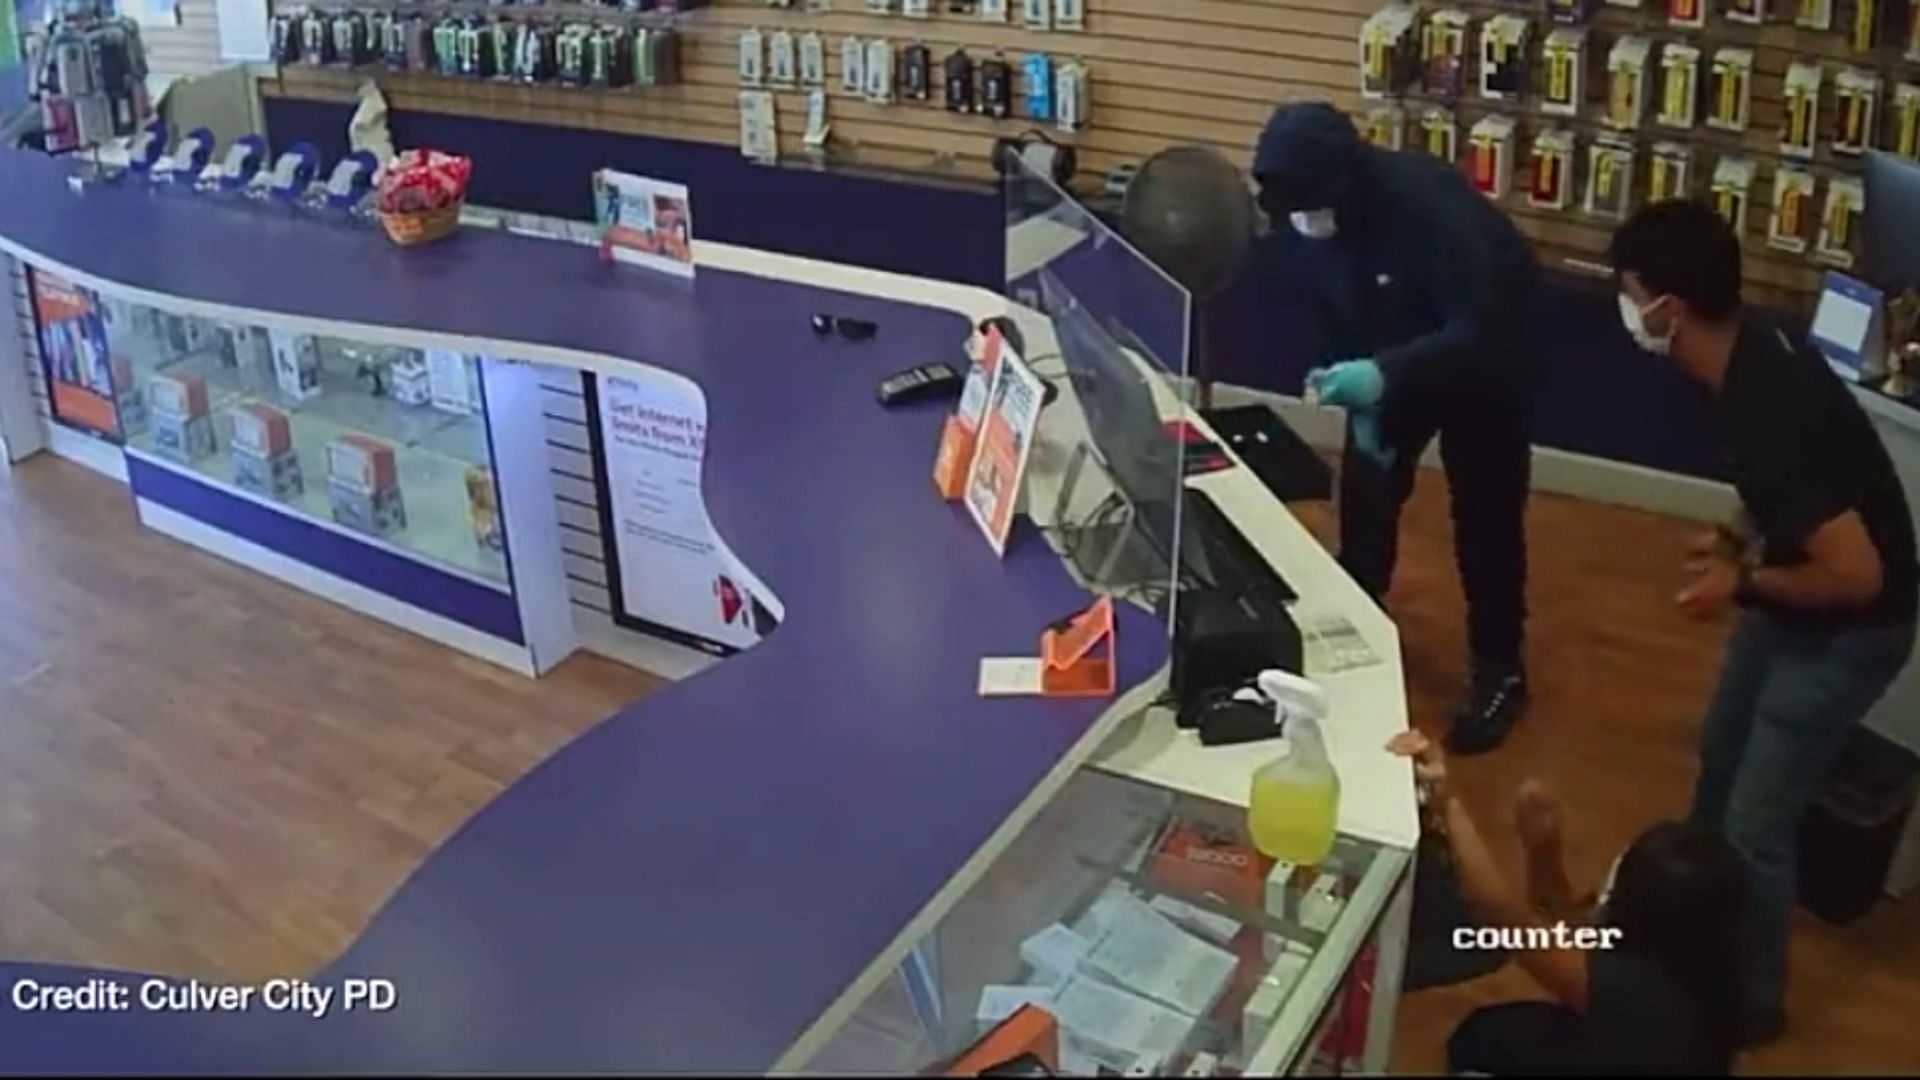 The brazen robbery at Boost Mobile was captured on camera. (Image via Culver City Police Department)